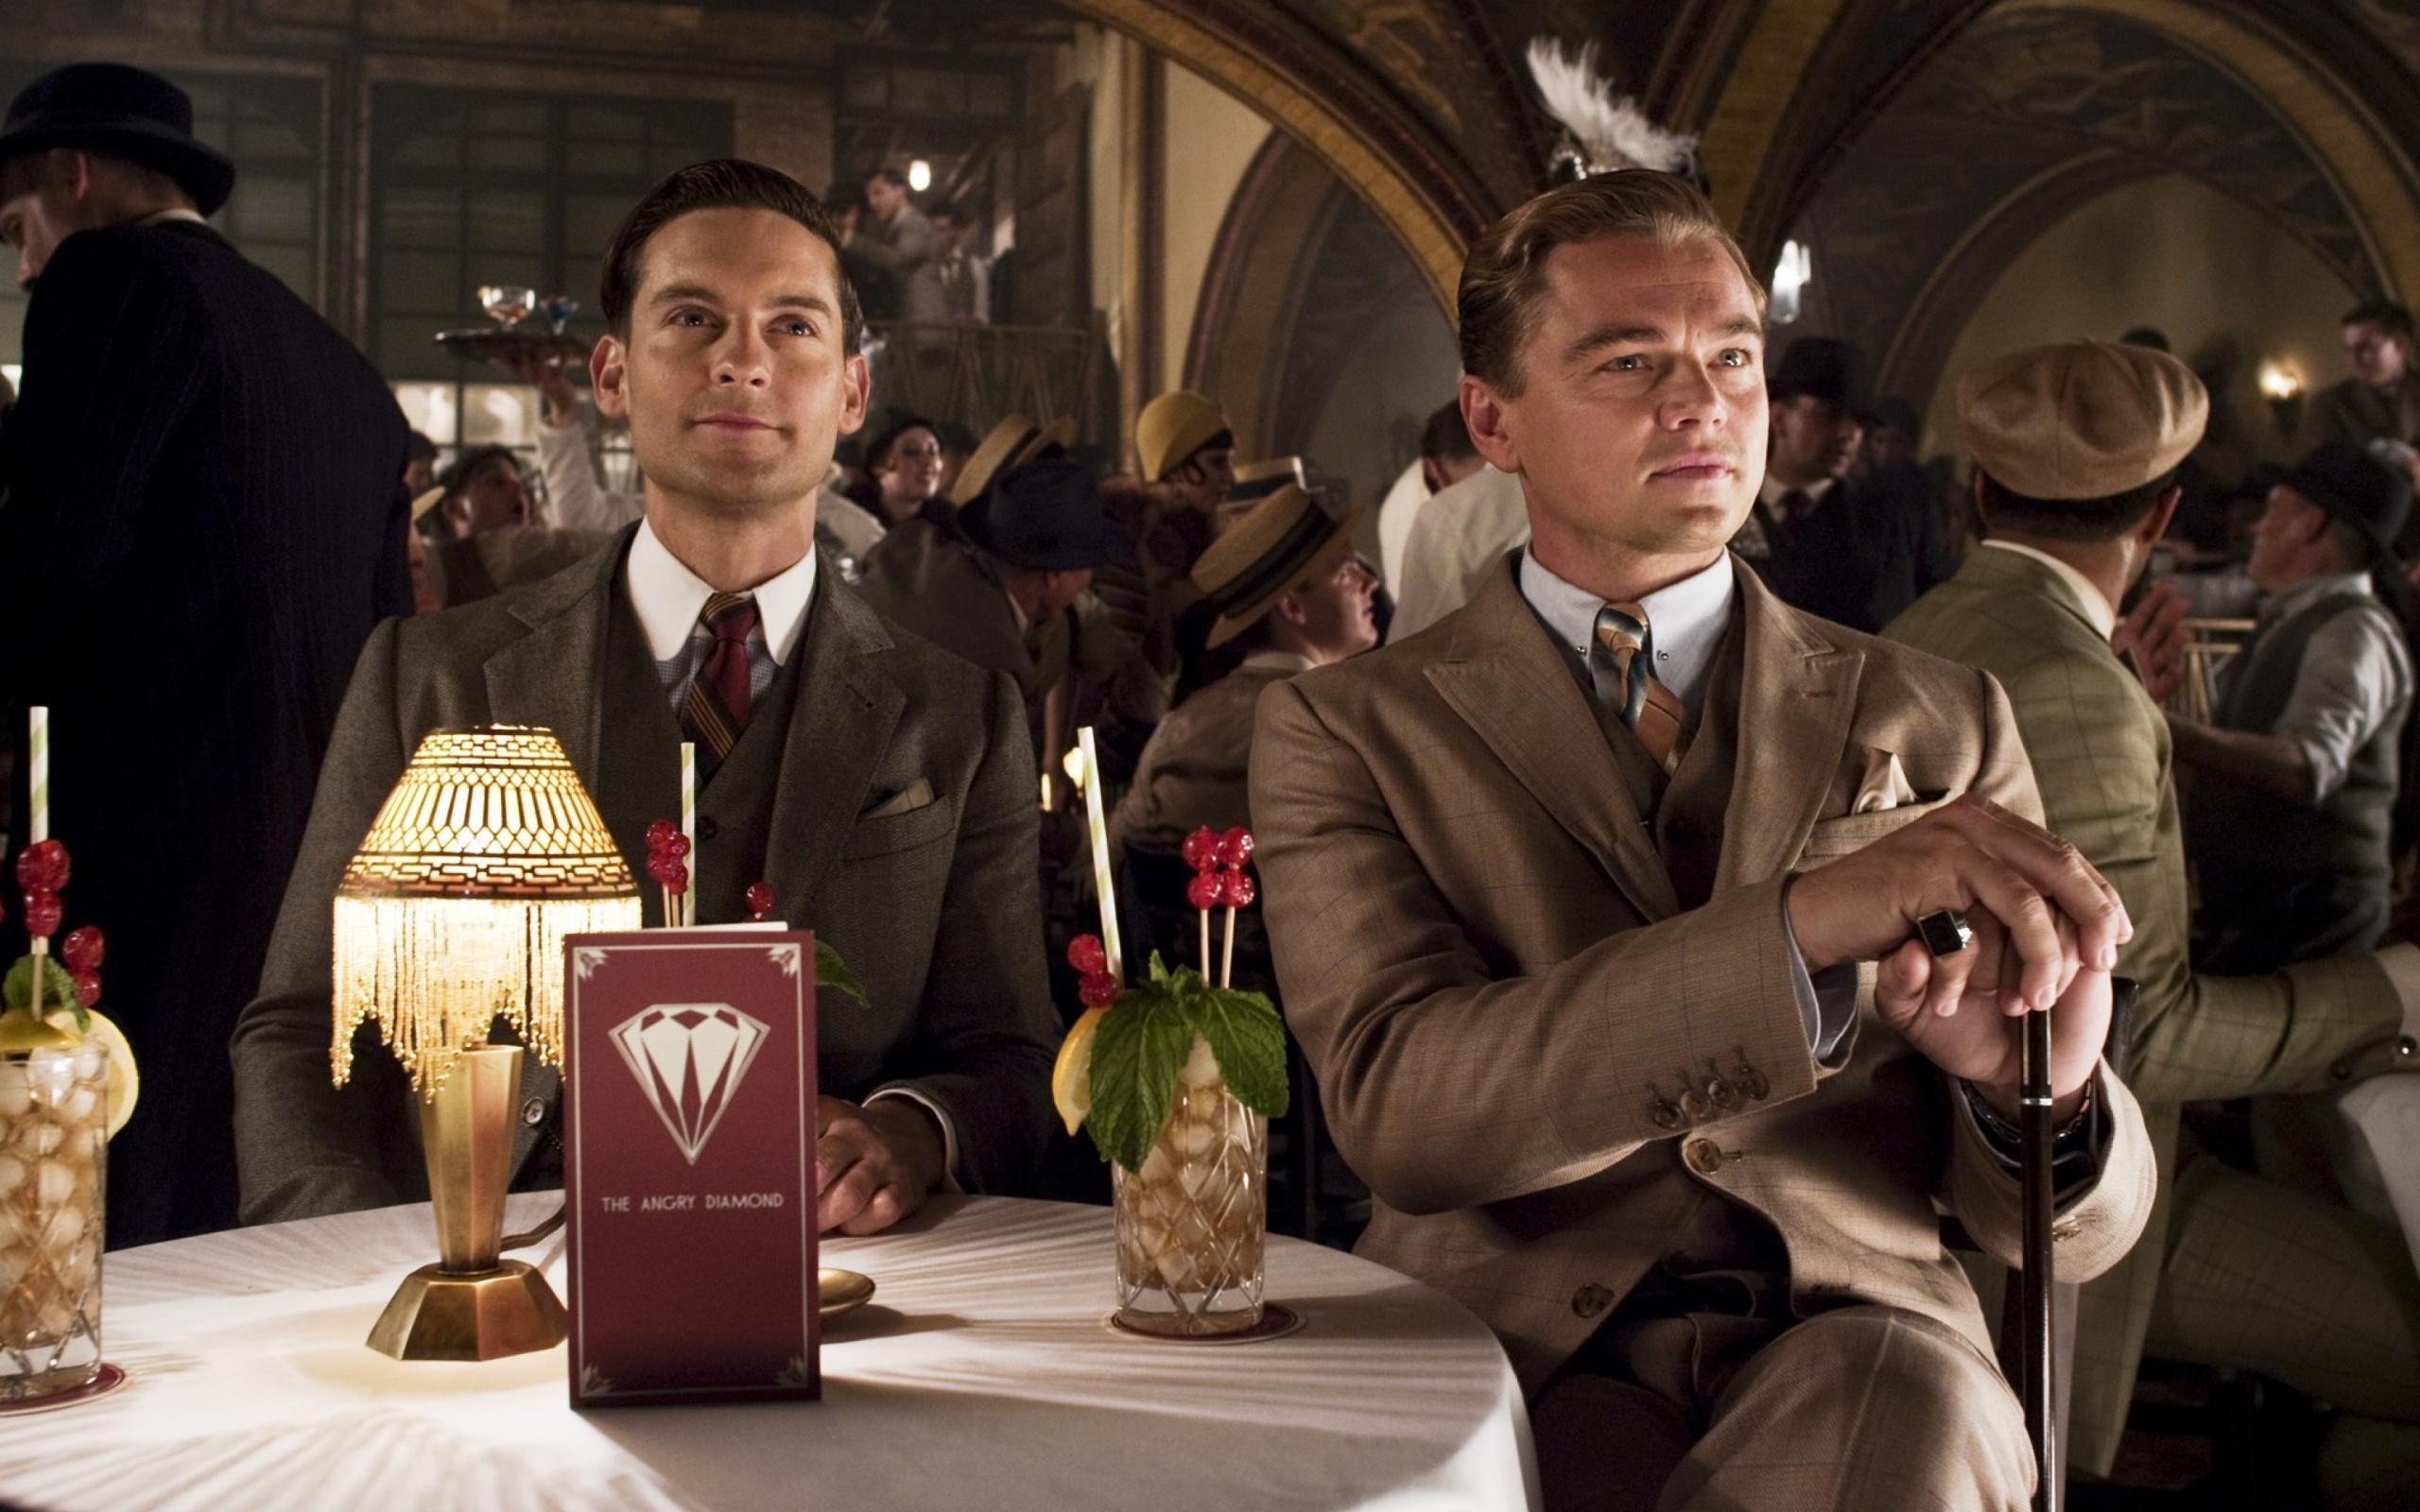 The Great Gatsby wallpaper 2560x1600